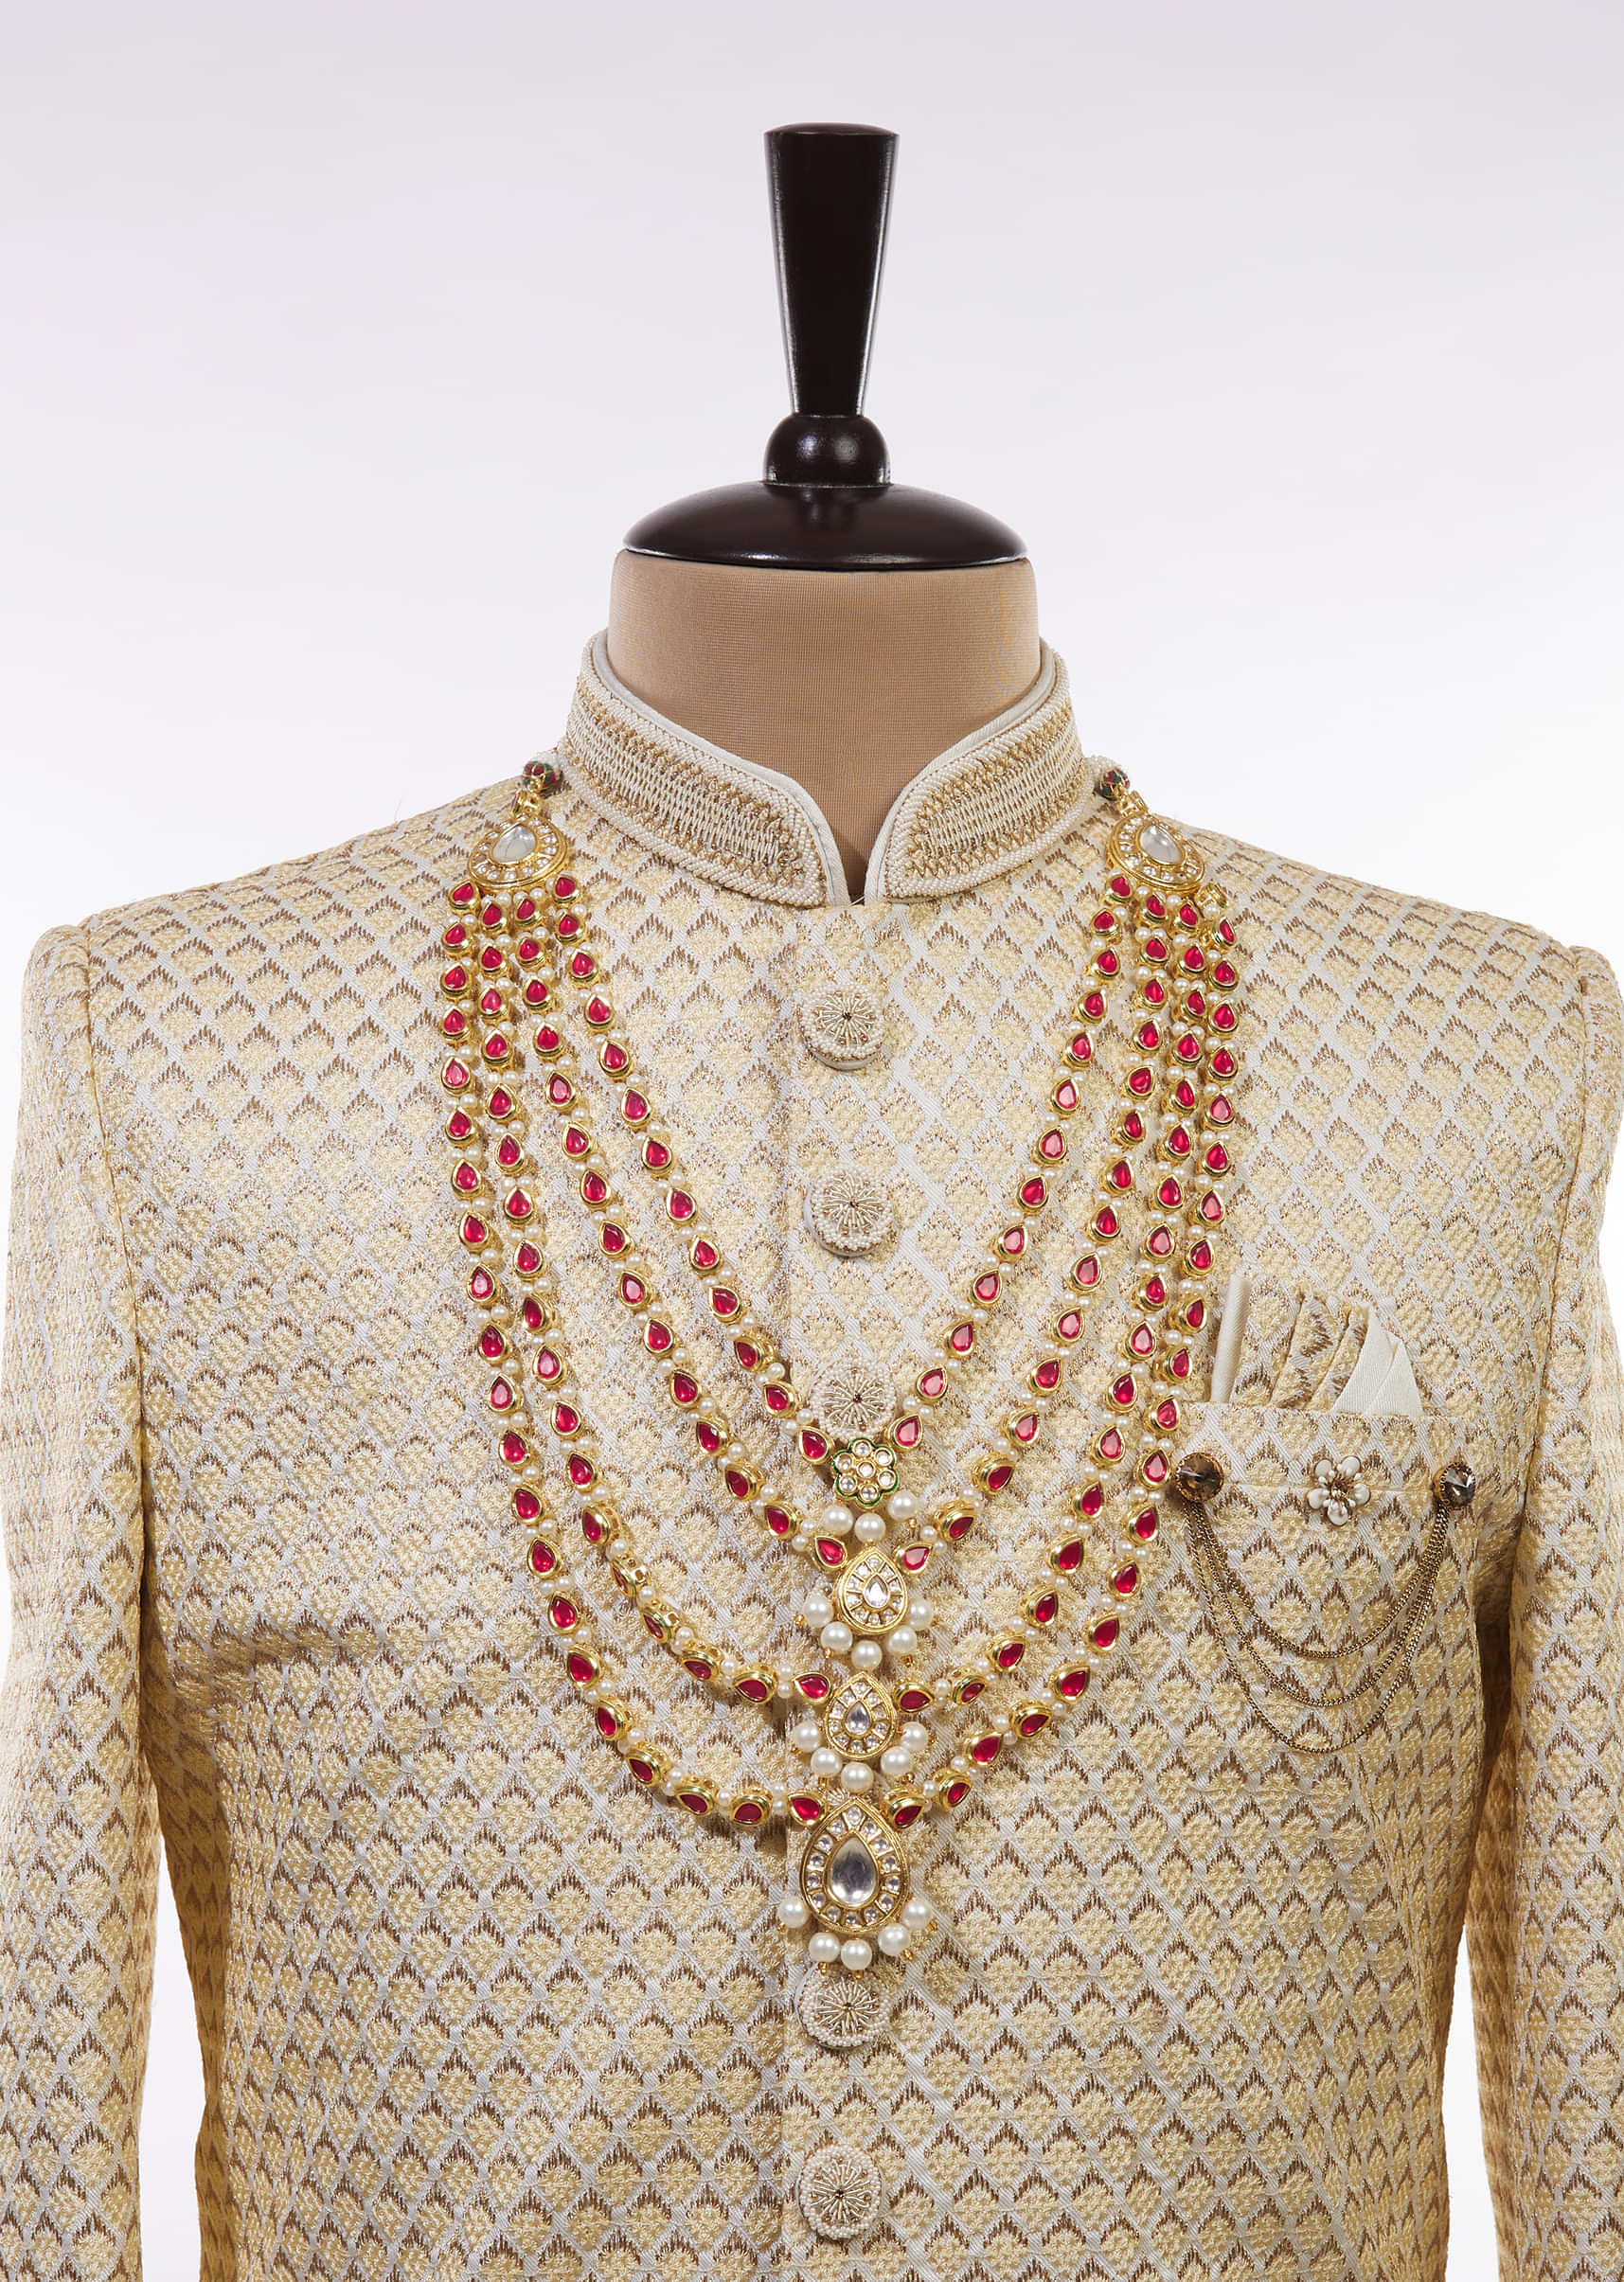 Traditional Gold Toned Layered Kundan Mala In Red And White